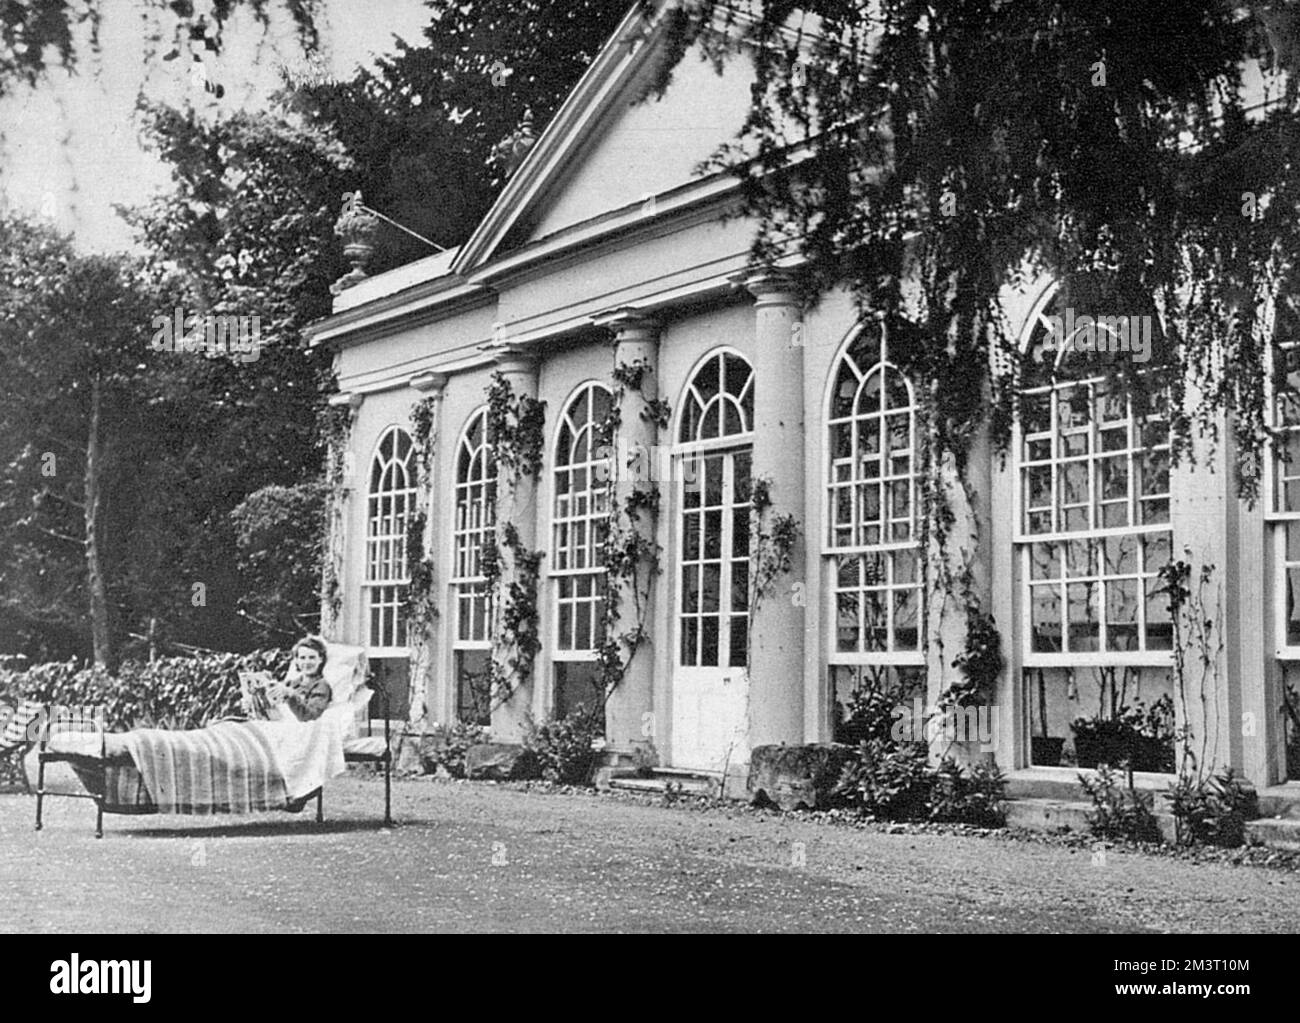 Country Houses in Wartime - Shardeloes, Amersham, Bucks in use a Maternity Home for Evacuee Mothers. The Orangery, dating back to 1790 - Mrs Clark in foreground. Stock Photo